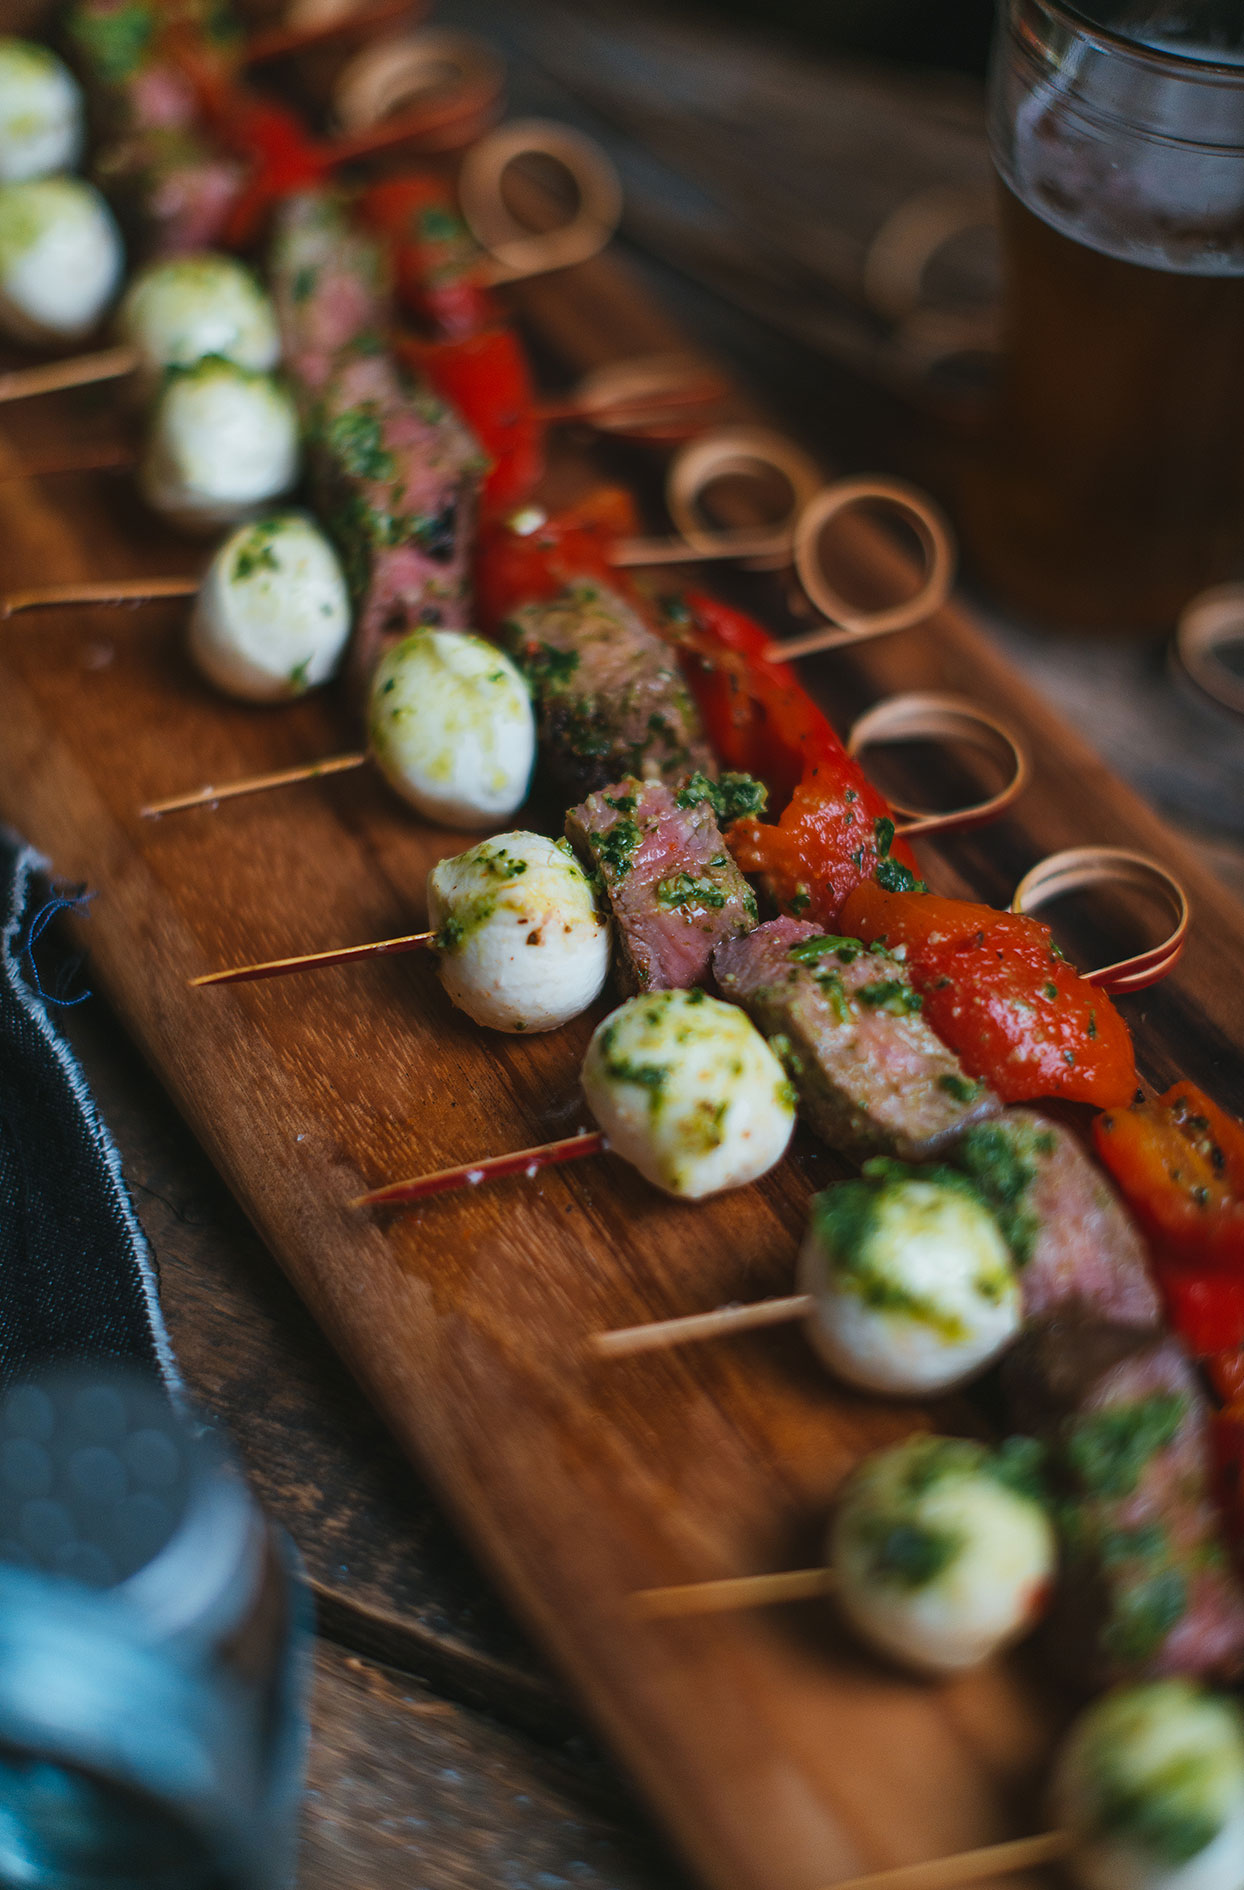 Mini-skewers with sirloin, grilled bell pepper and mozzarella